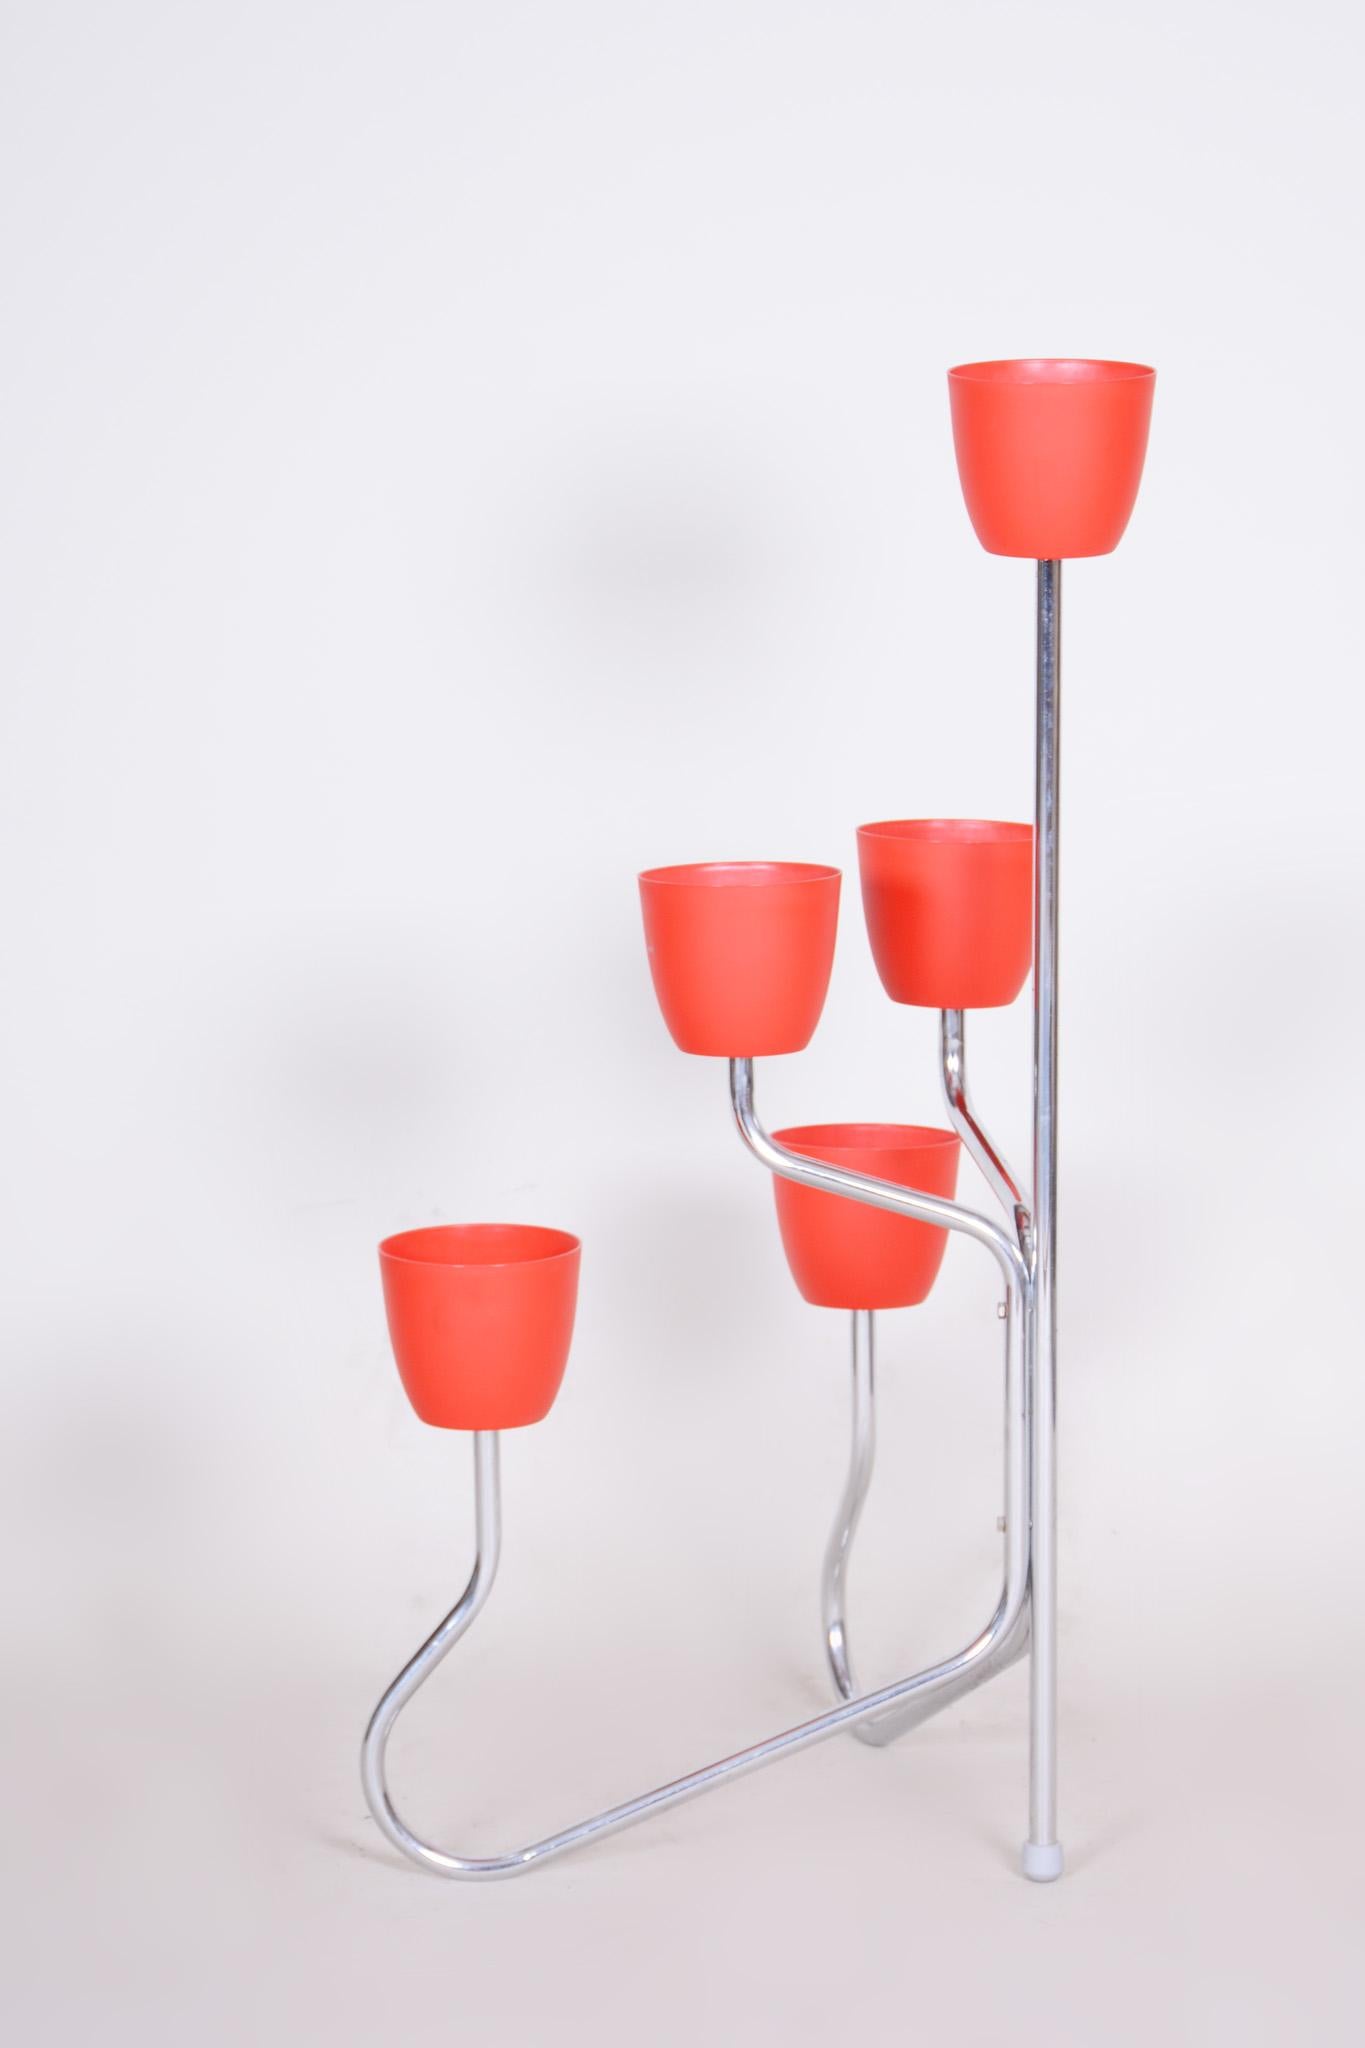 Czech Bauhaus Chrome Flower Stand Made Out of Chrome Plated Steel, 1950s For Sale 1